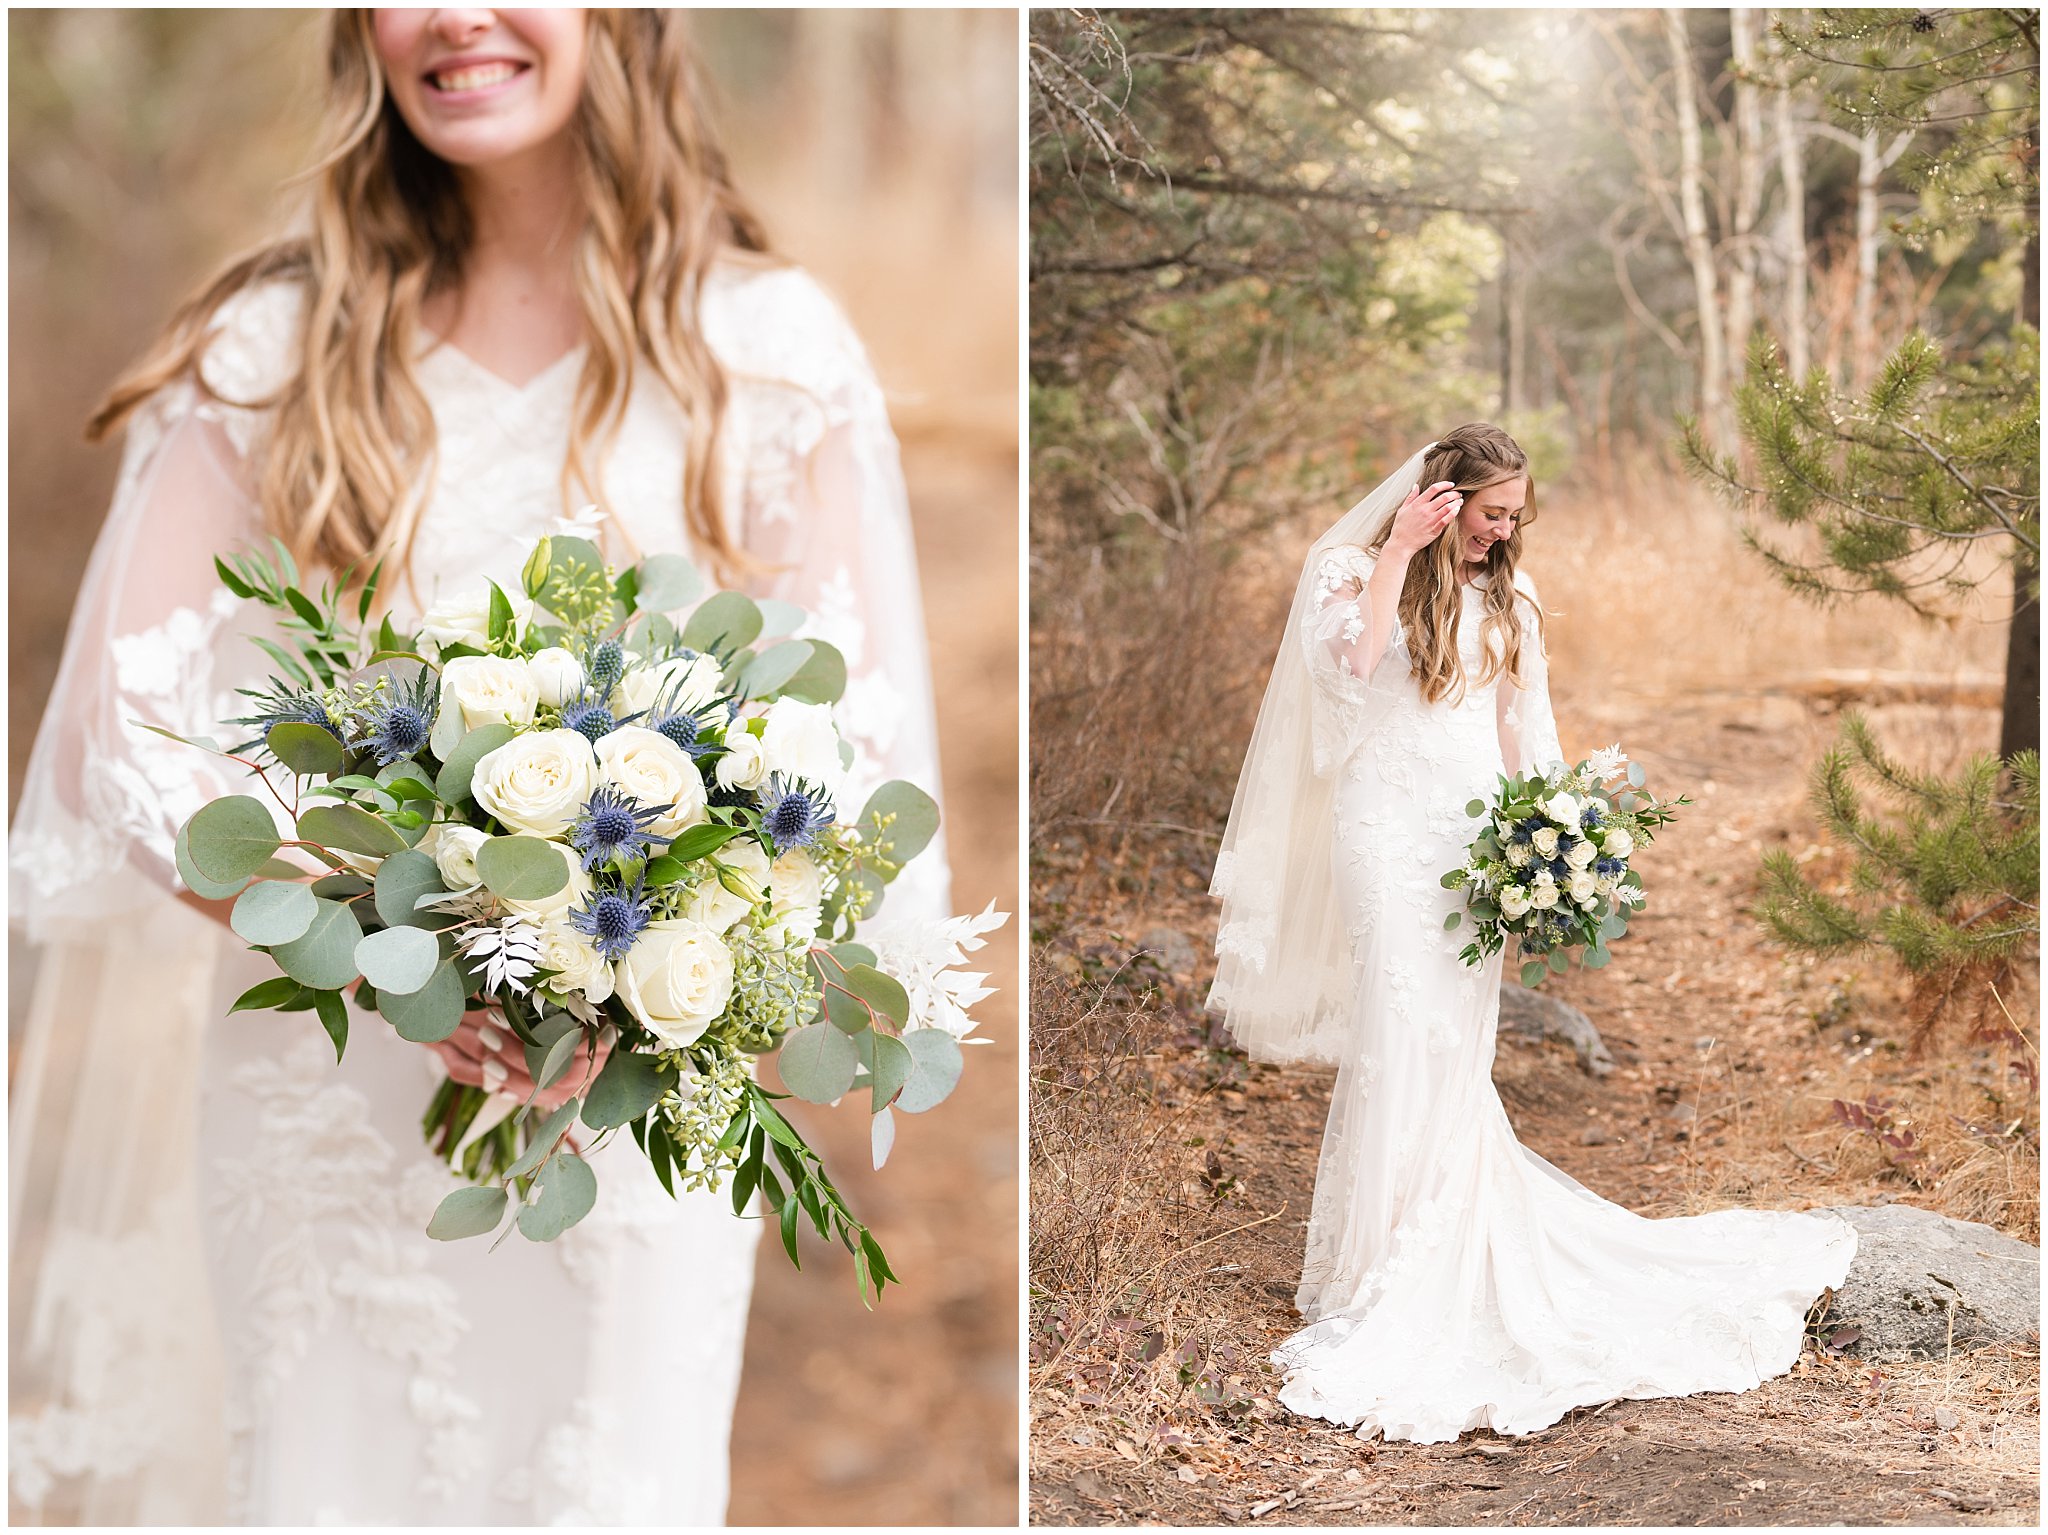 Bride in the mountains wearing lace dress with veil and white floral bouquet | Tibble Fork Winter Formal Session | Jessie and Dallin Photography